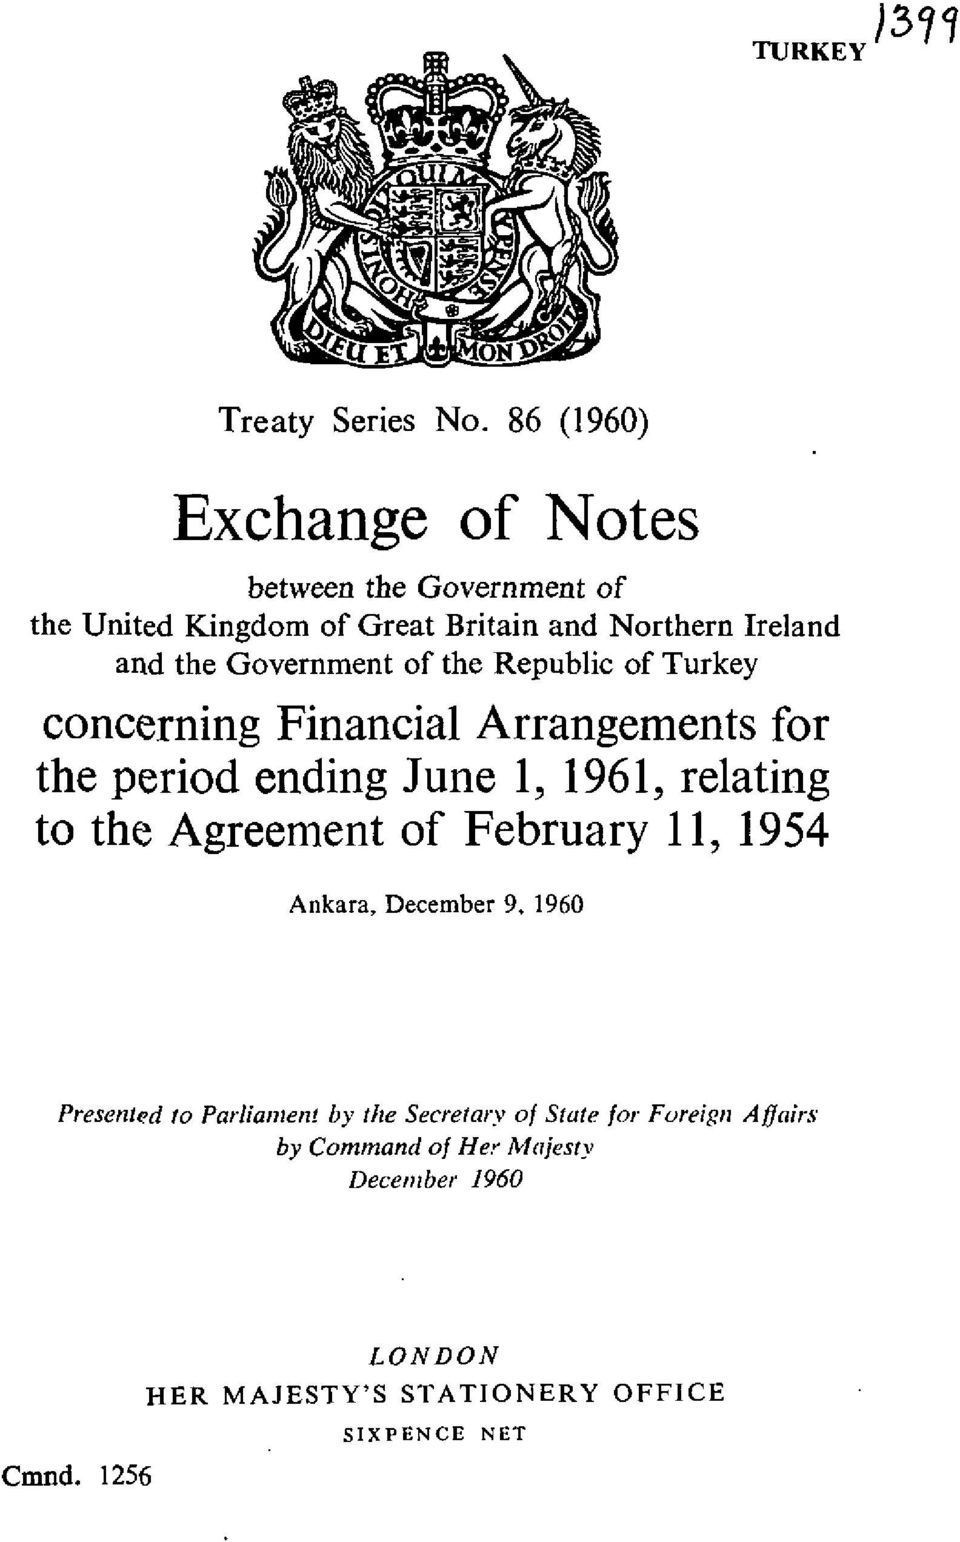 Government of the Republic of Turkey concerning Financial Arrangements for the period ending June 1, 1961, relating to the